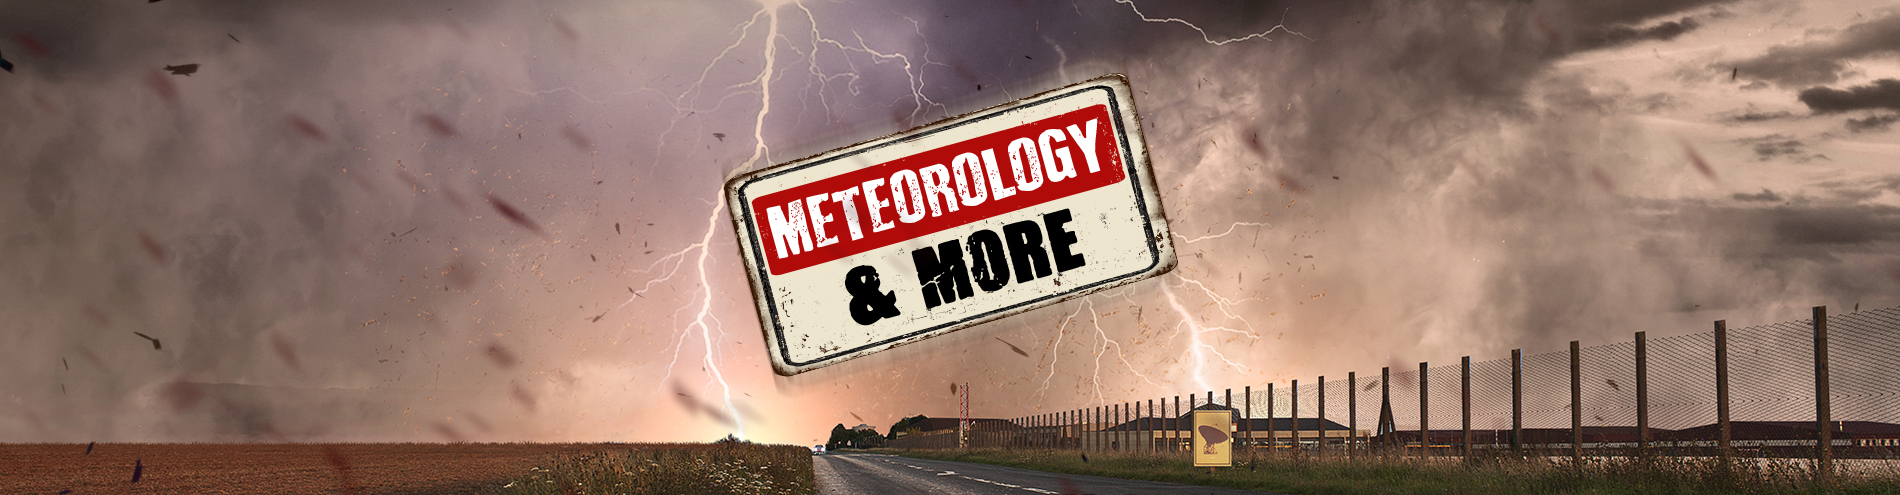 Meteorology and More Header